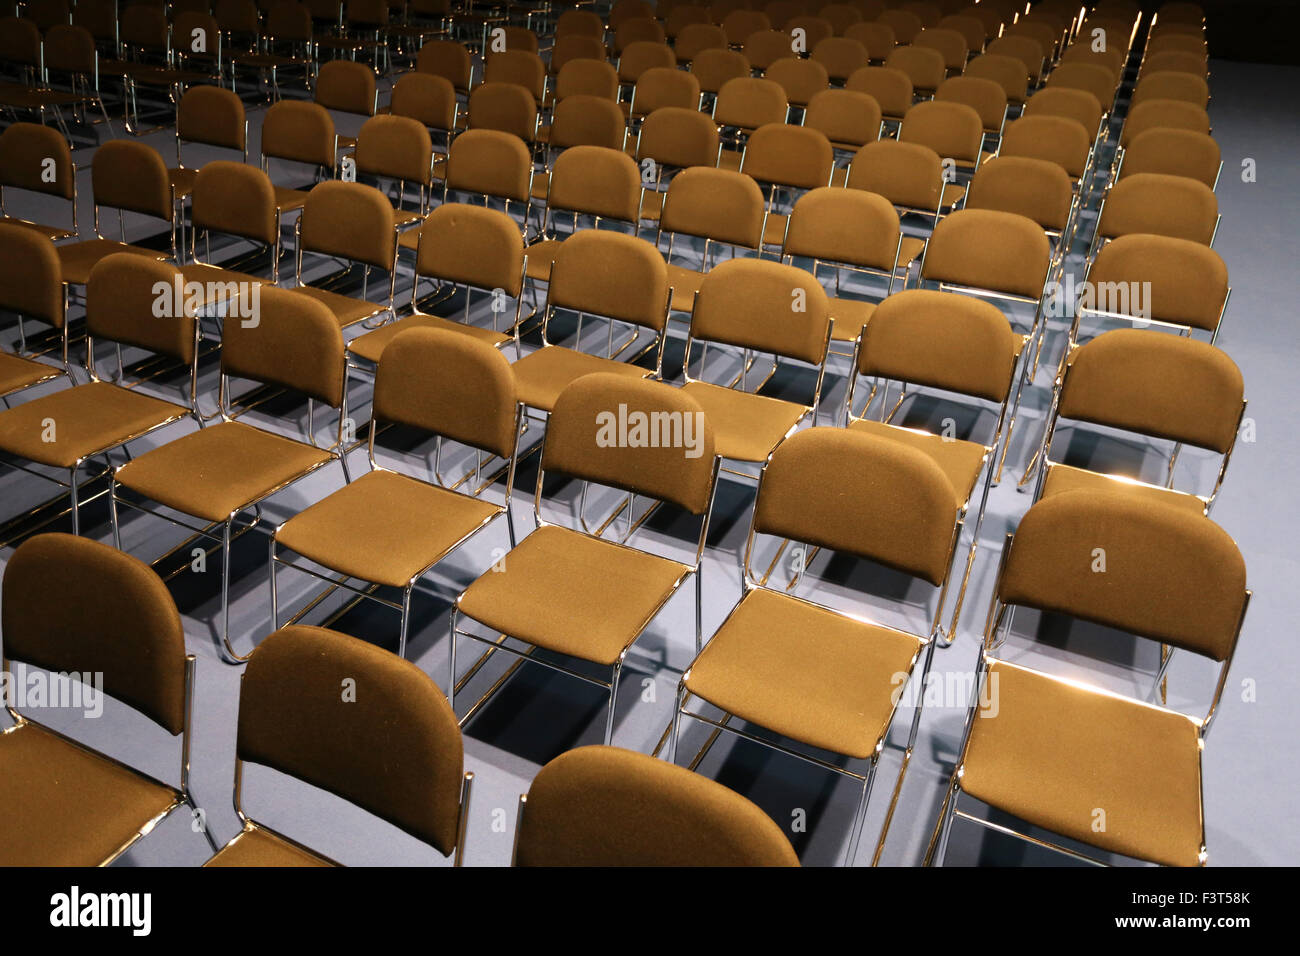 Big conference room full of empty seats Stock Photo